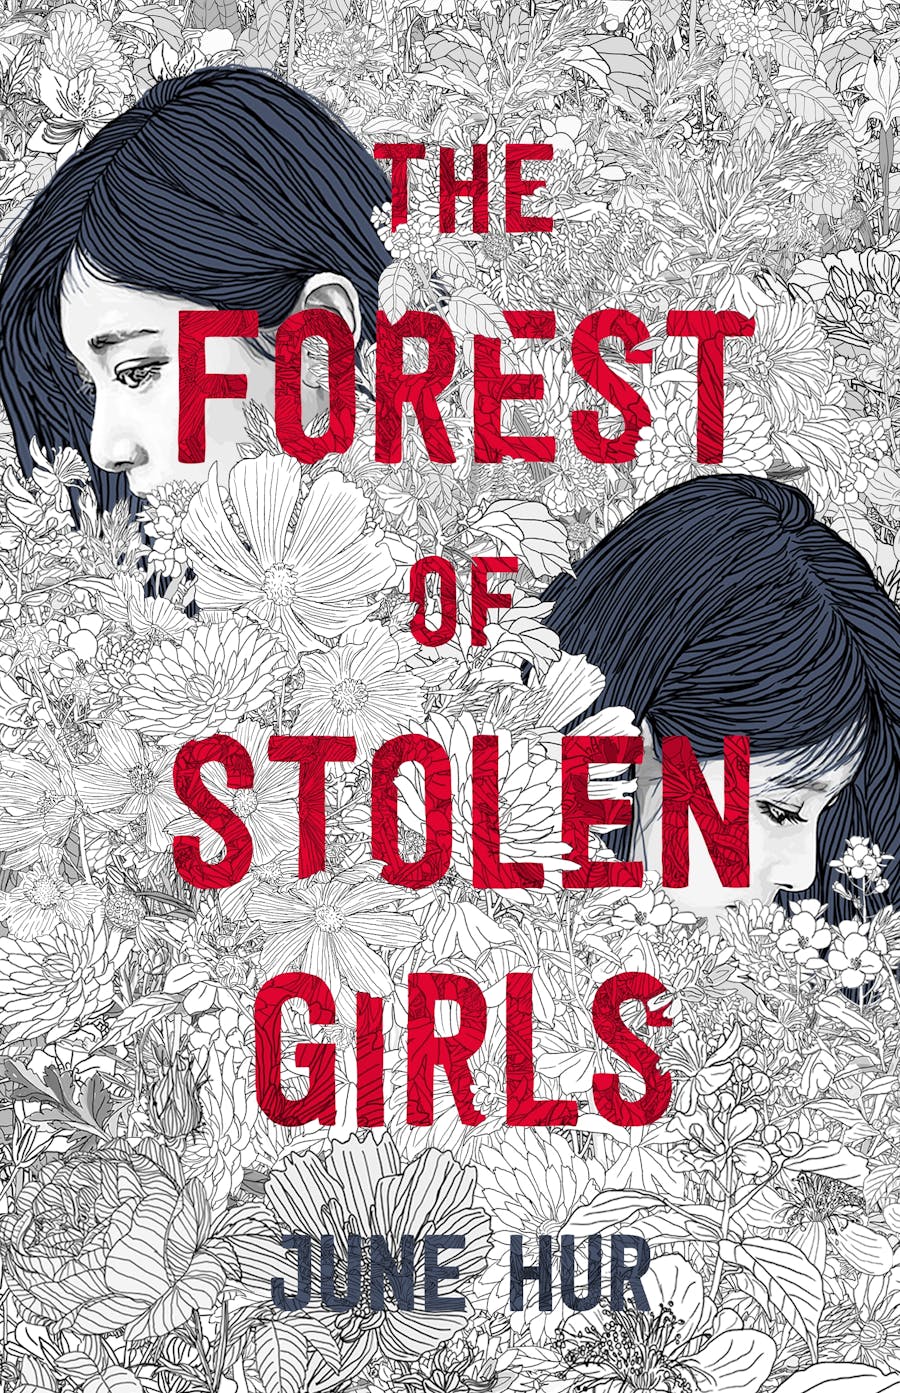 The Forest of Stolen Girls by June Hur